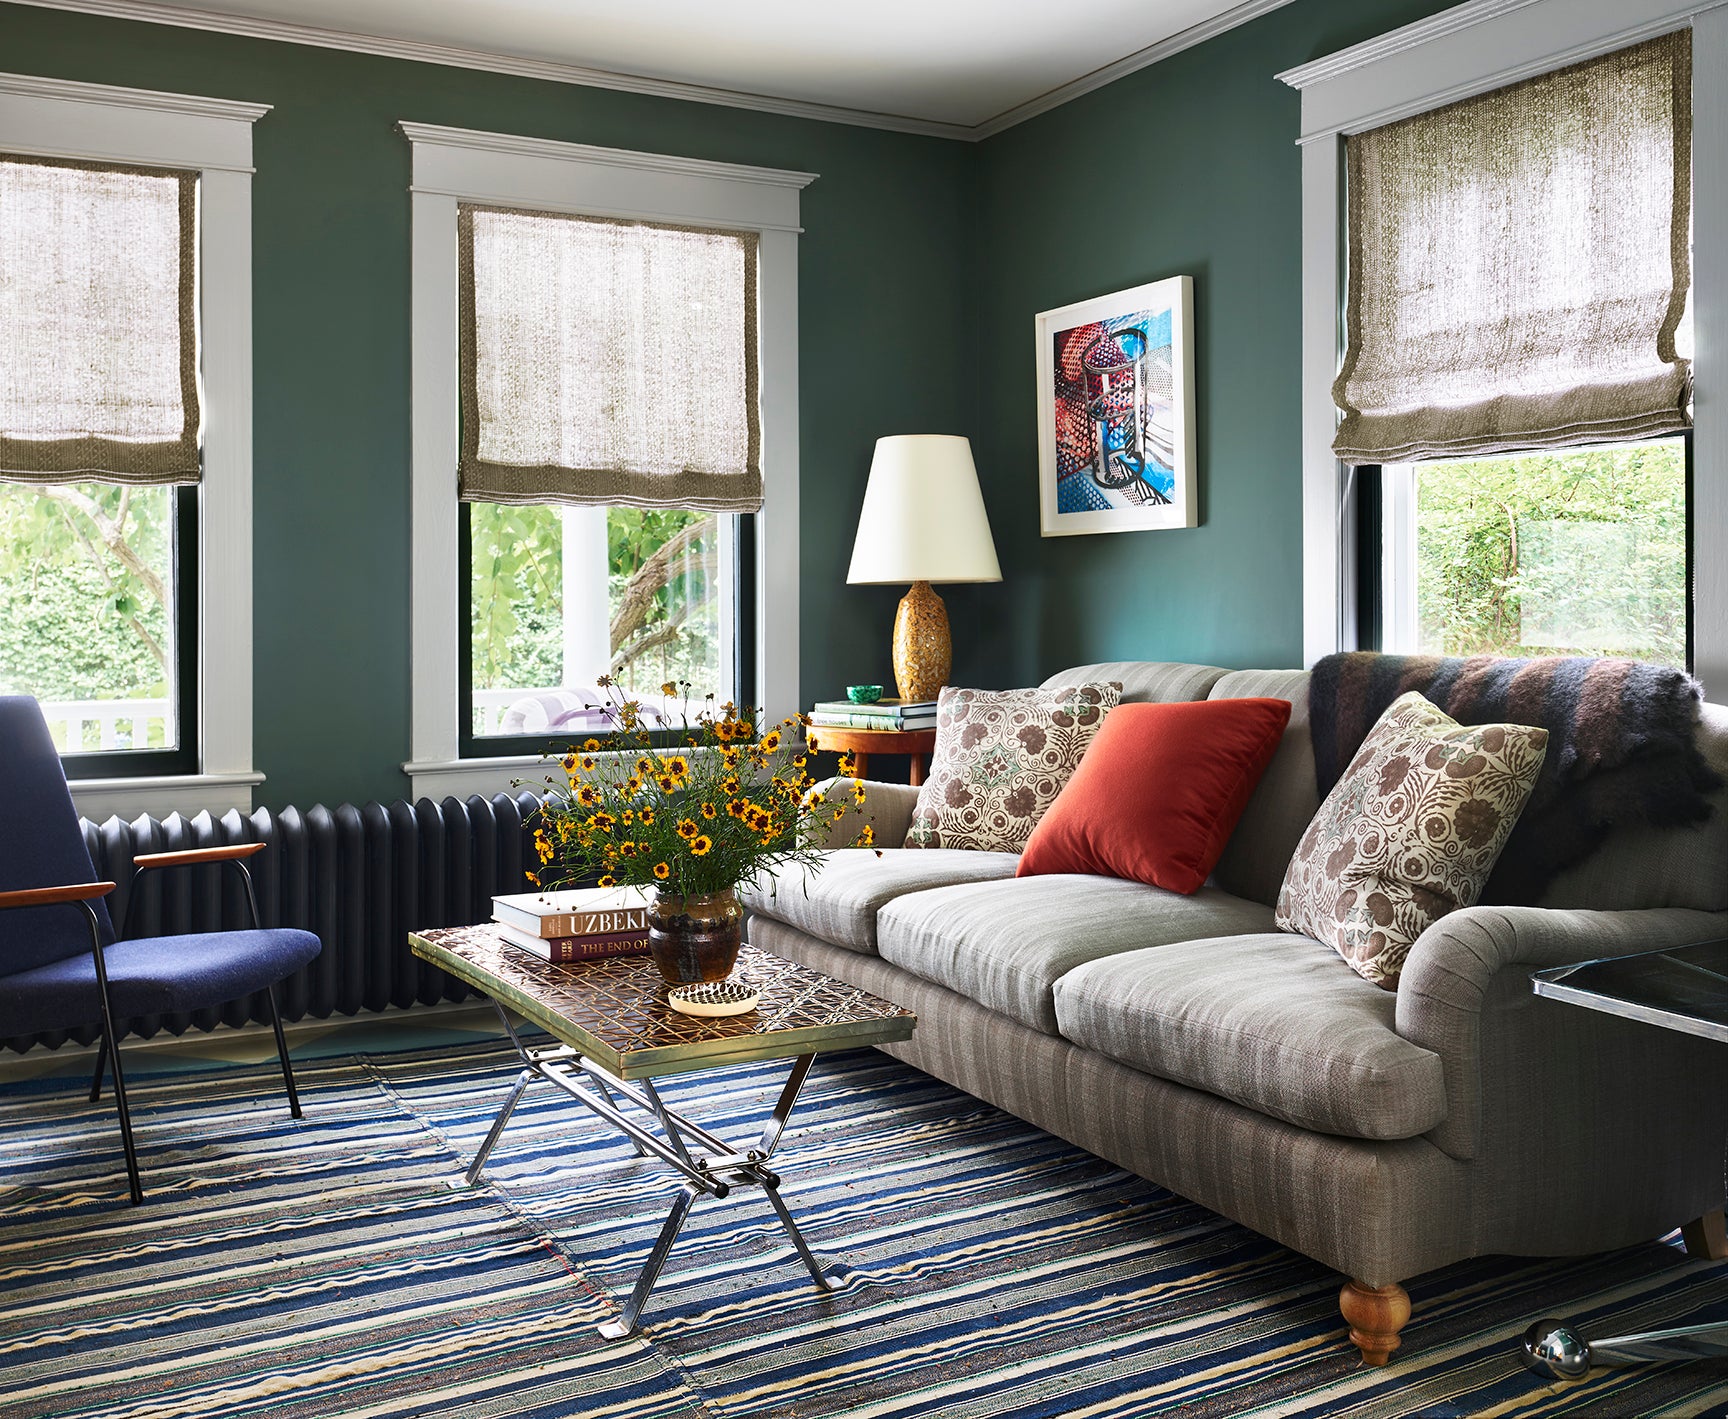 green living room with striped sofa and rug